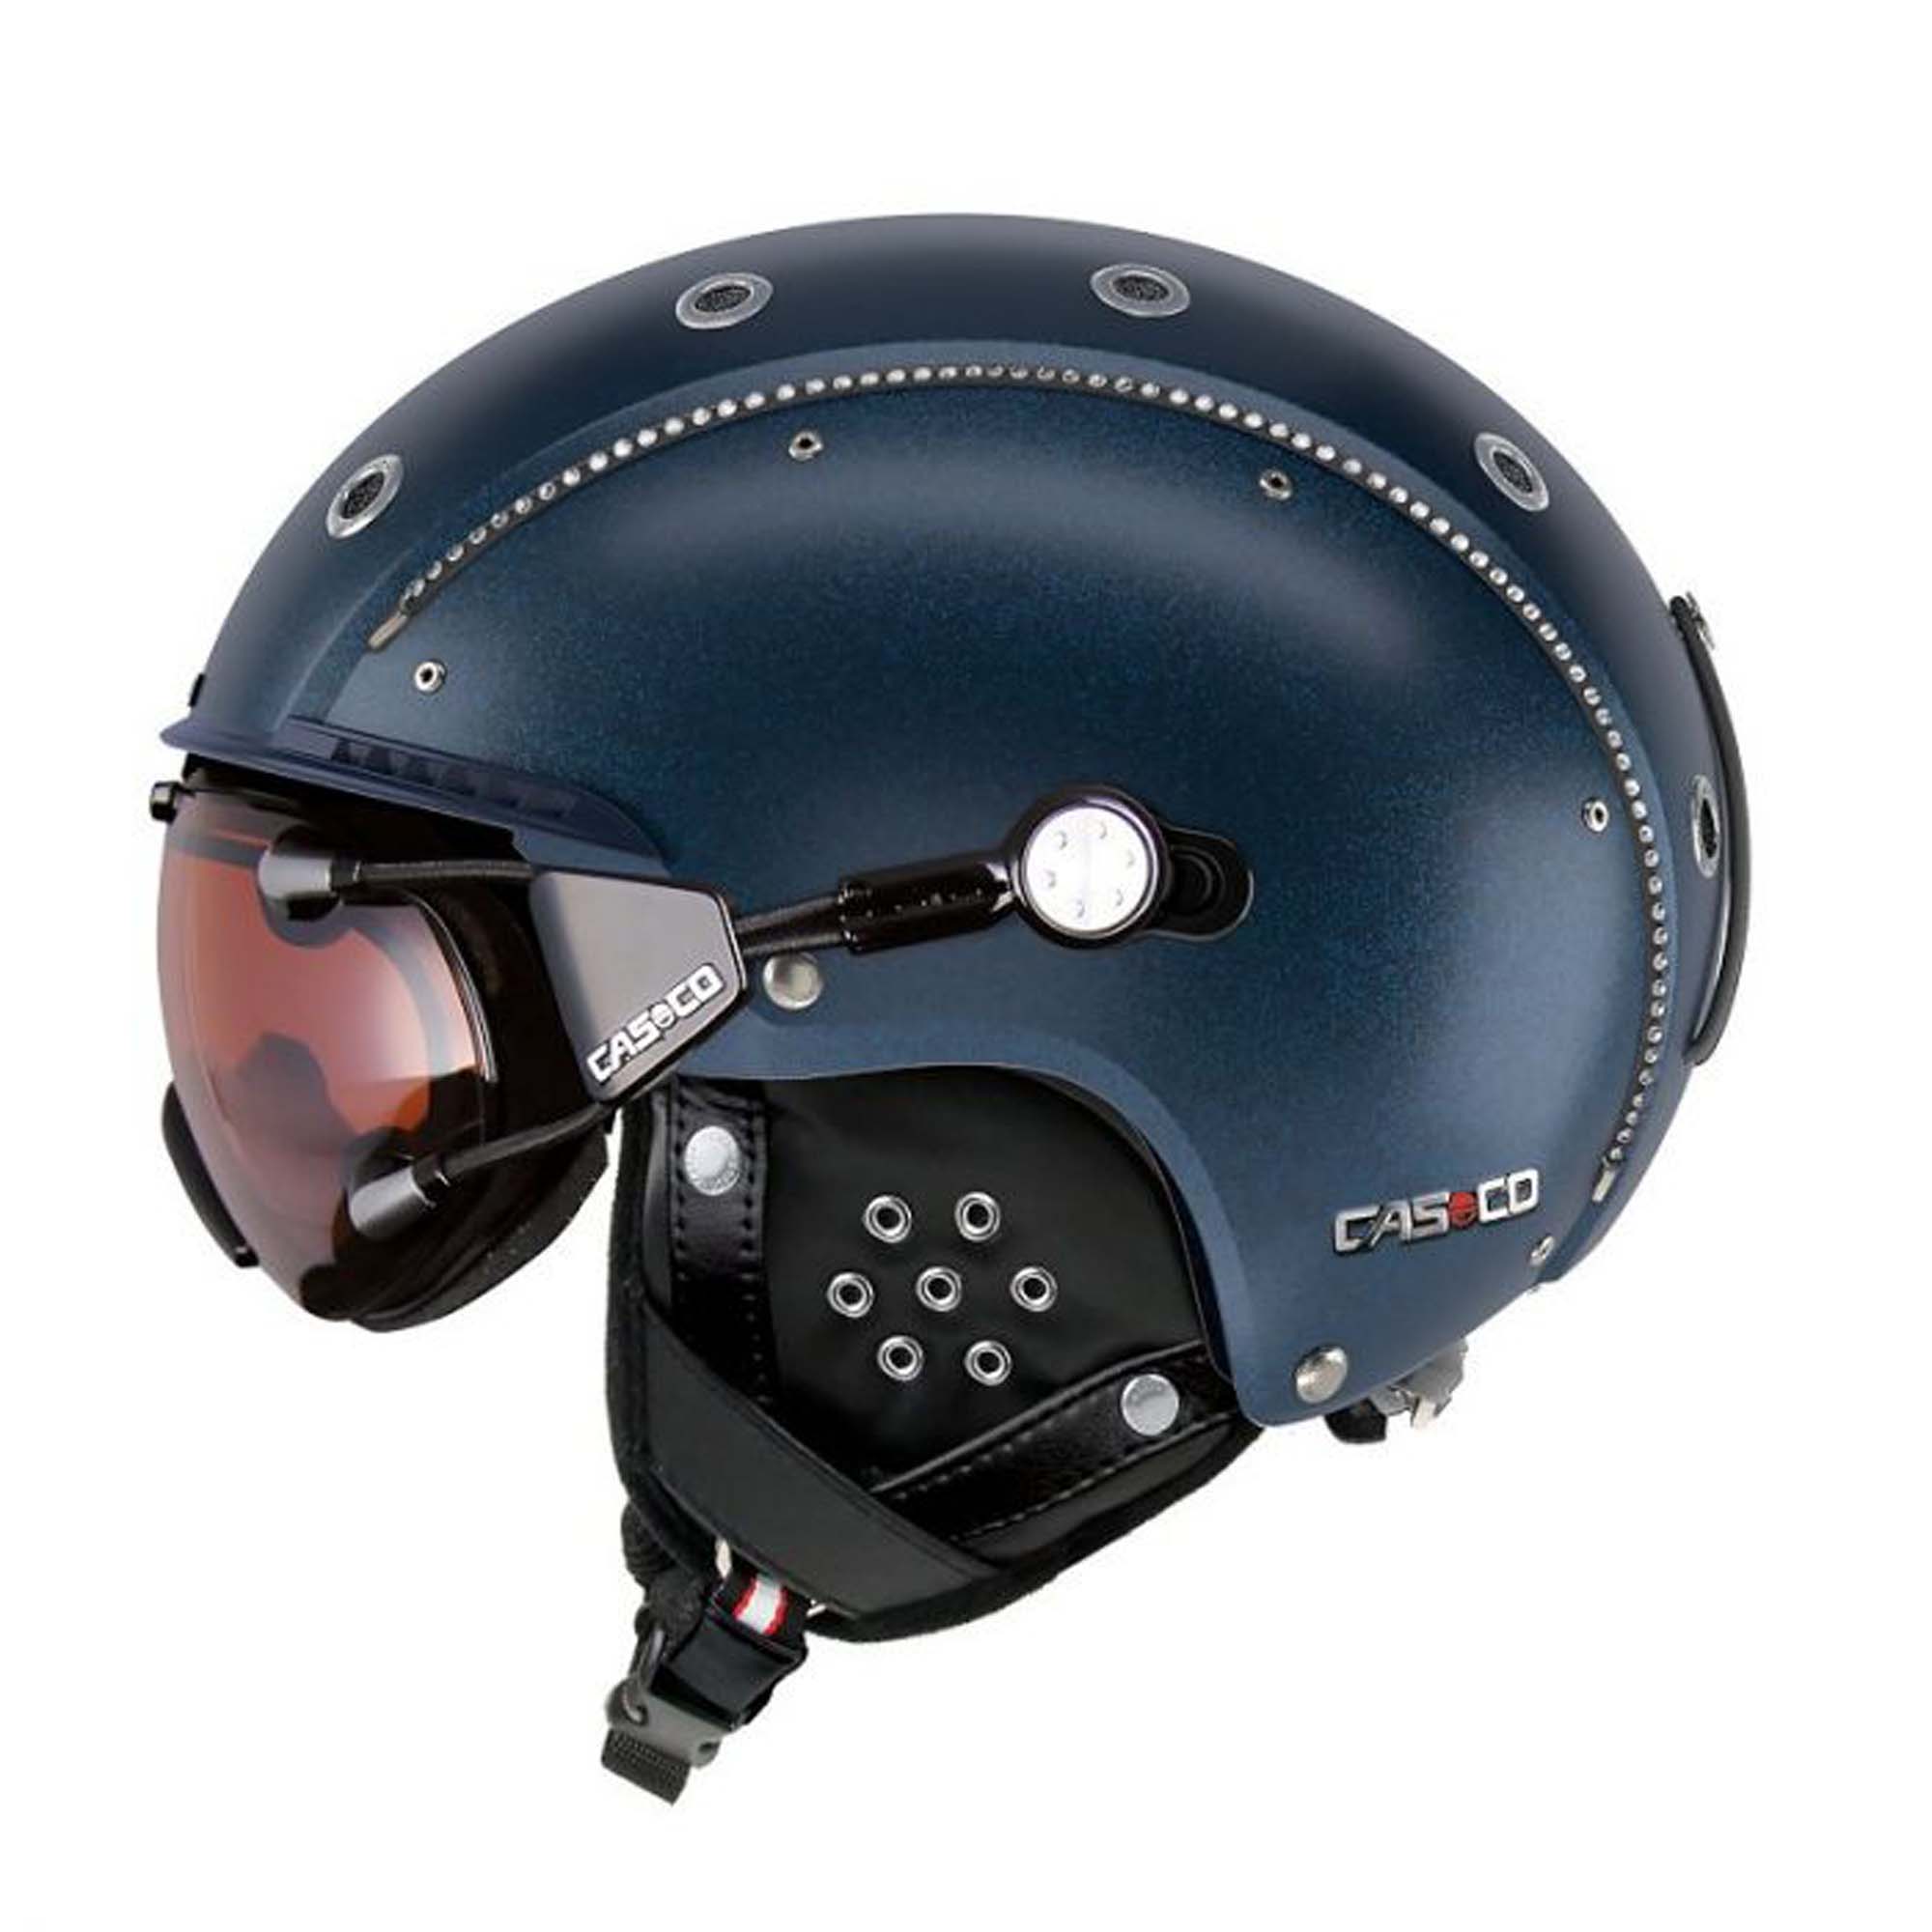 CASCO sp-3 limited